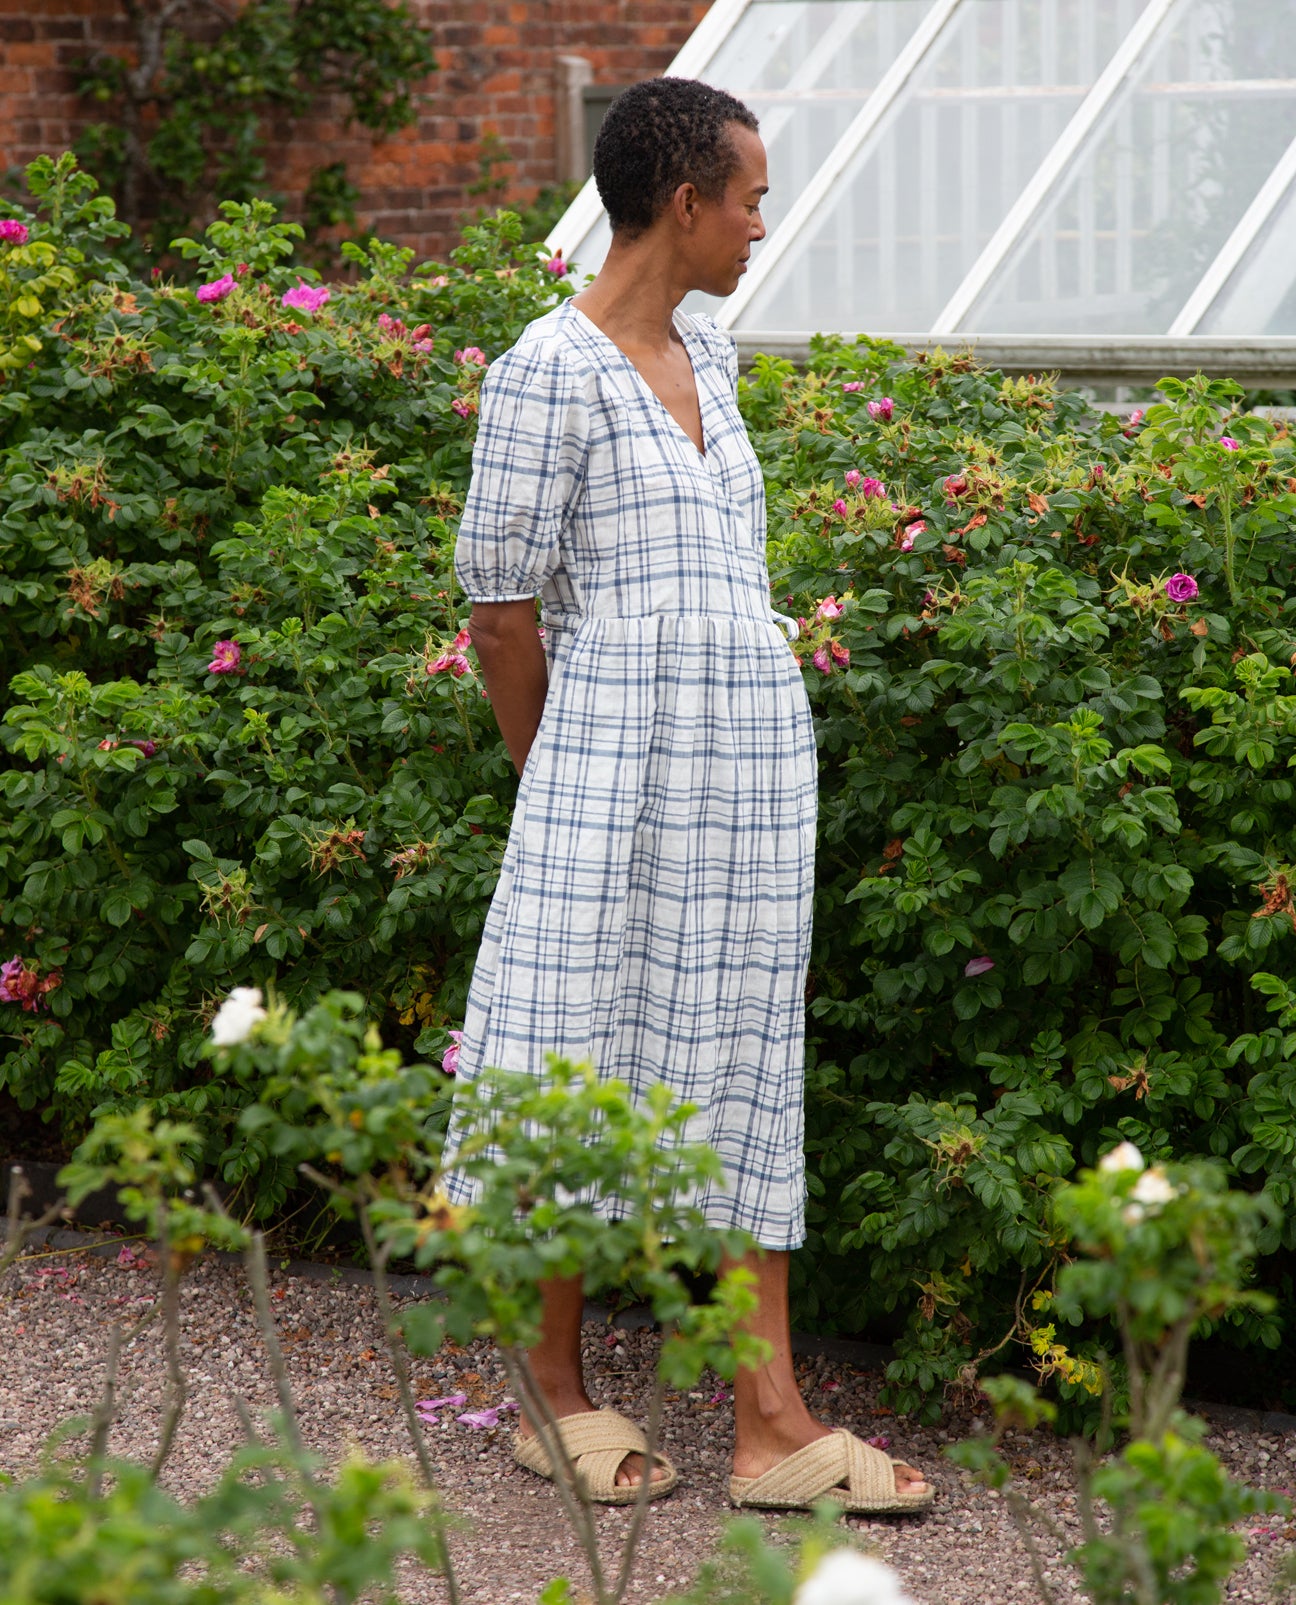 Trixie Linen and Cotton Dress in Navy & White Check